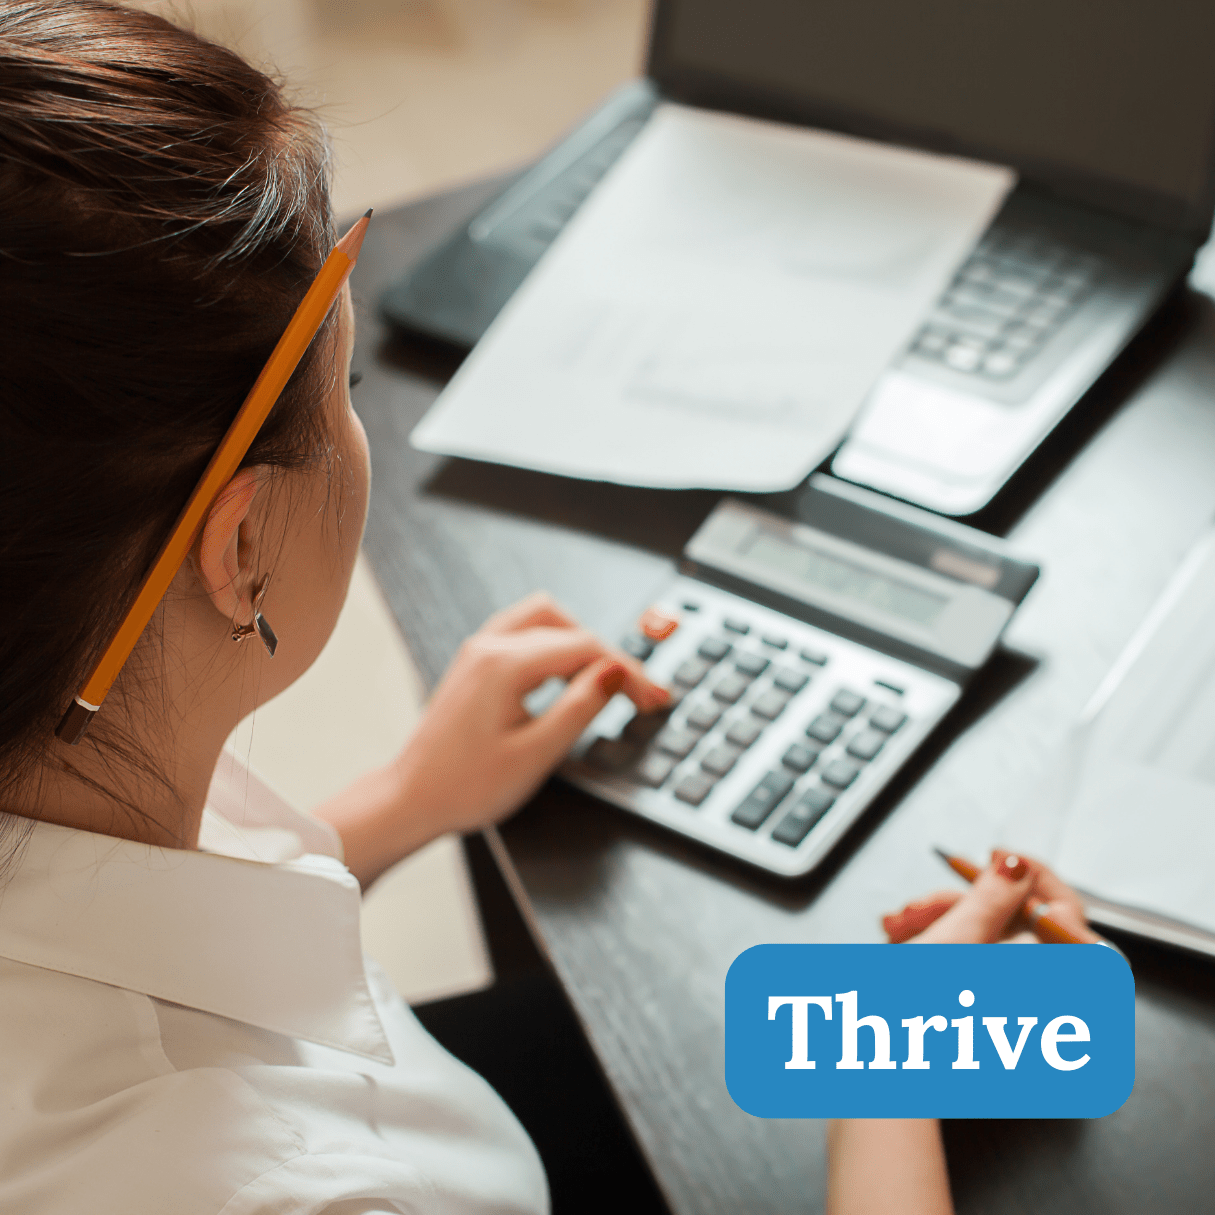 An image of a woman on a calculator with paperwork on a desk. The words titled "Thrive" are on top.